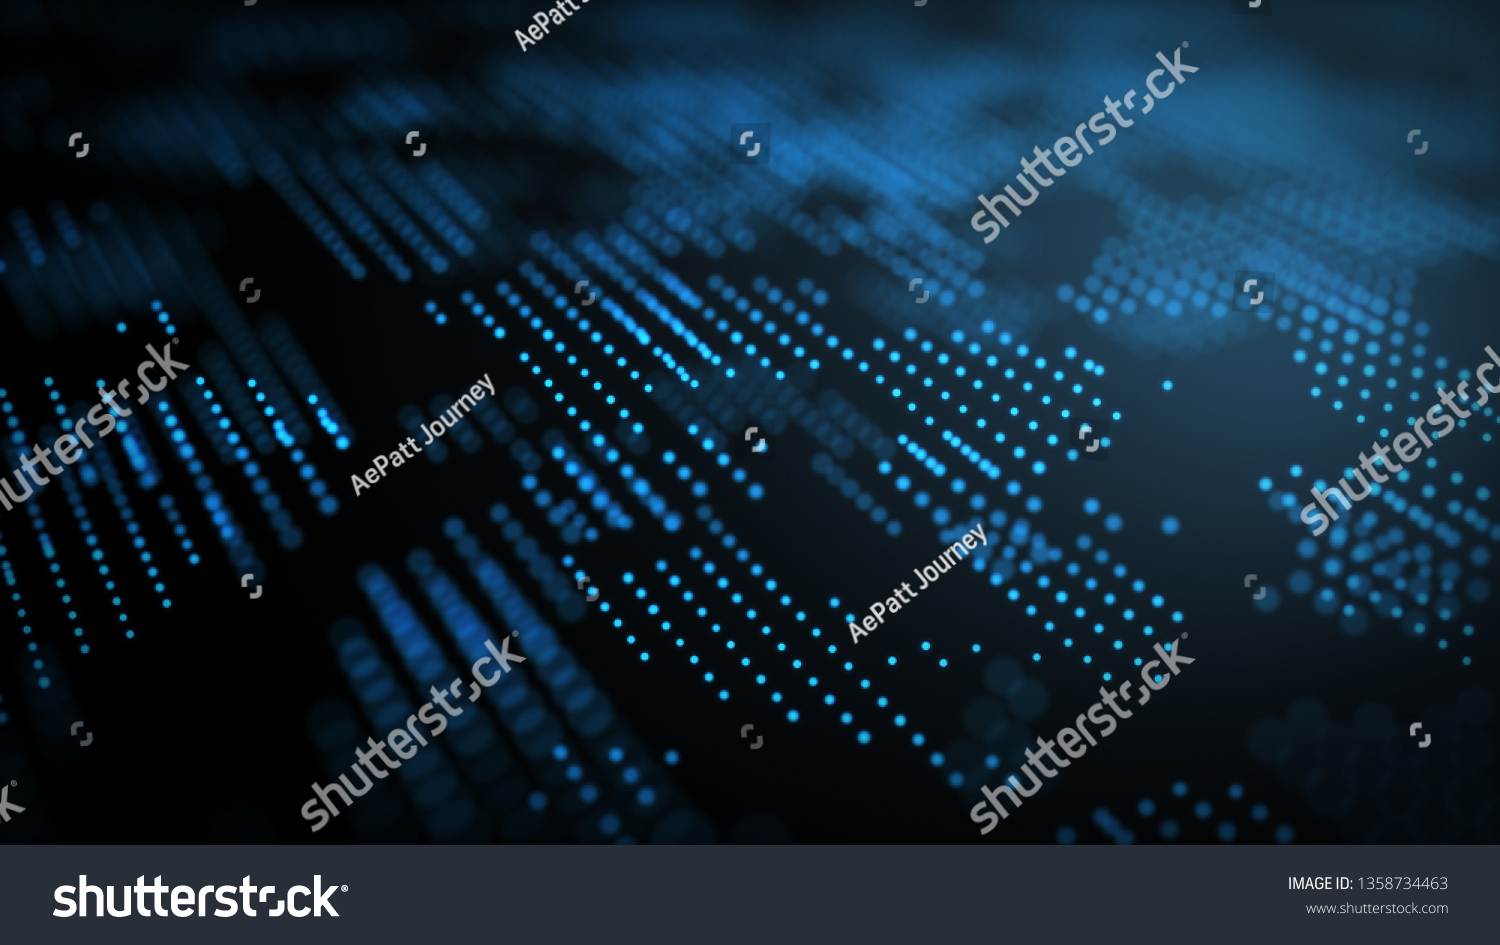 Abstract dark and blue digital background. Big data digital code, Data Communication and Transfer of DNA Biology. Futuristic information technology concept. #1358734463